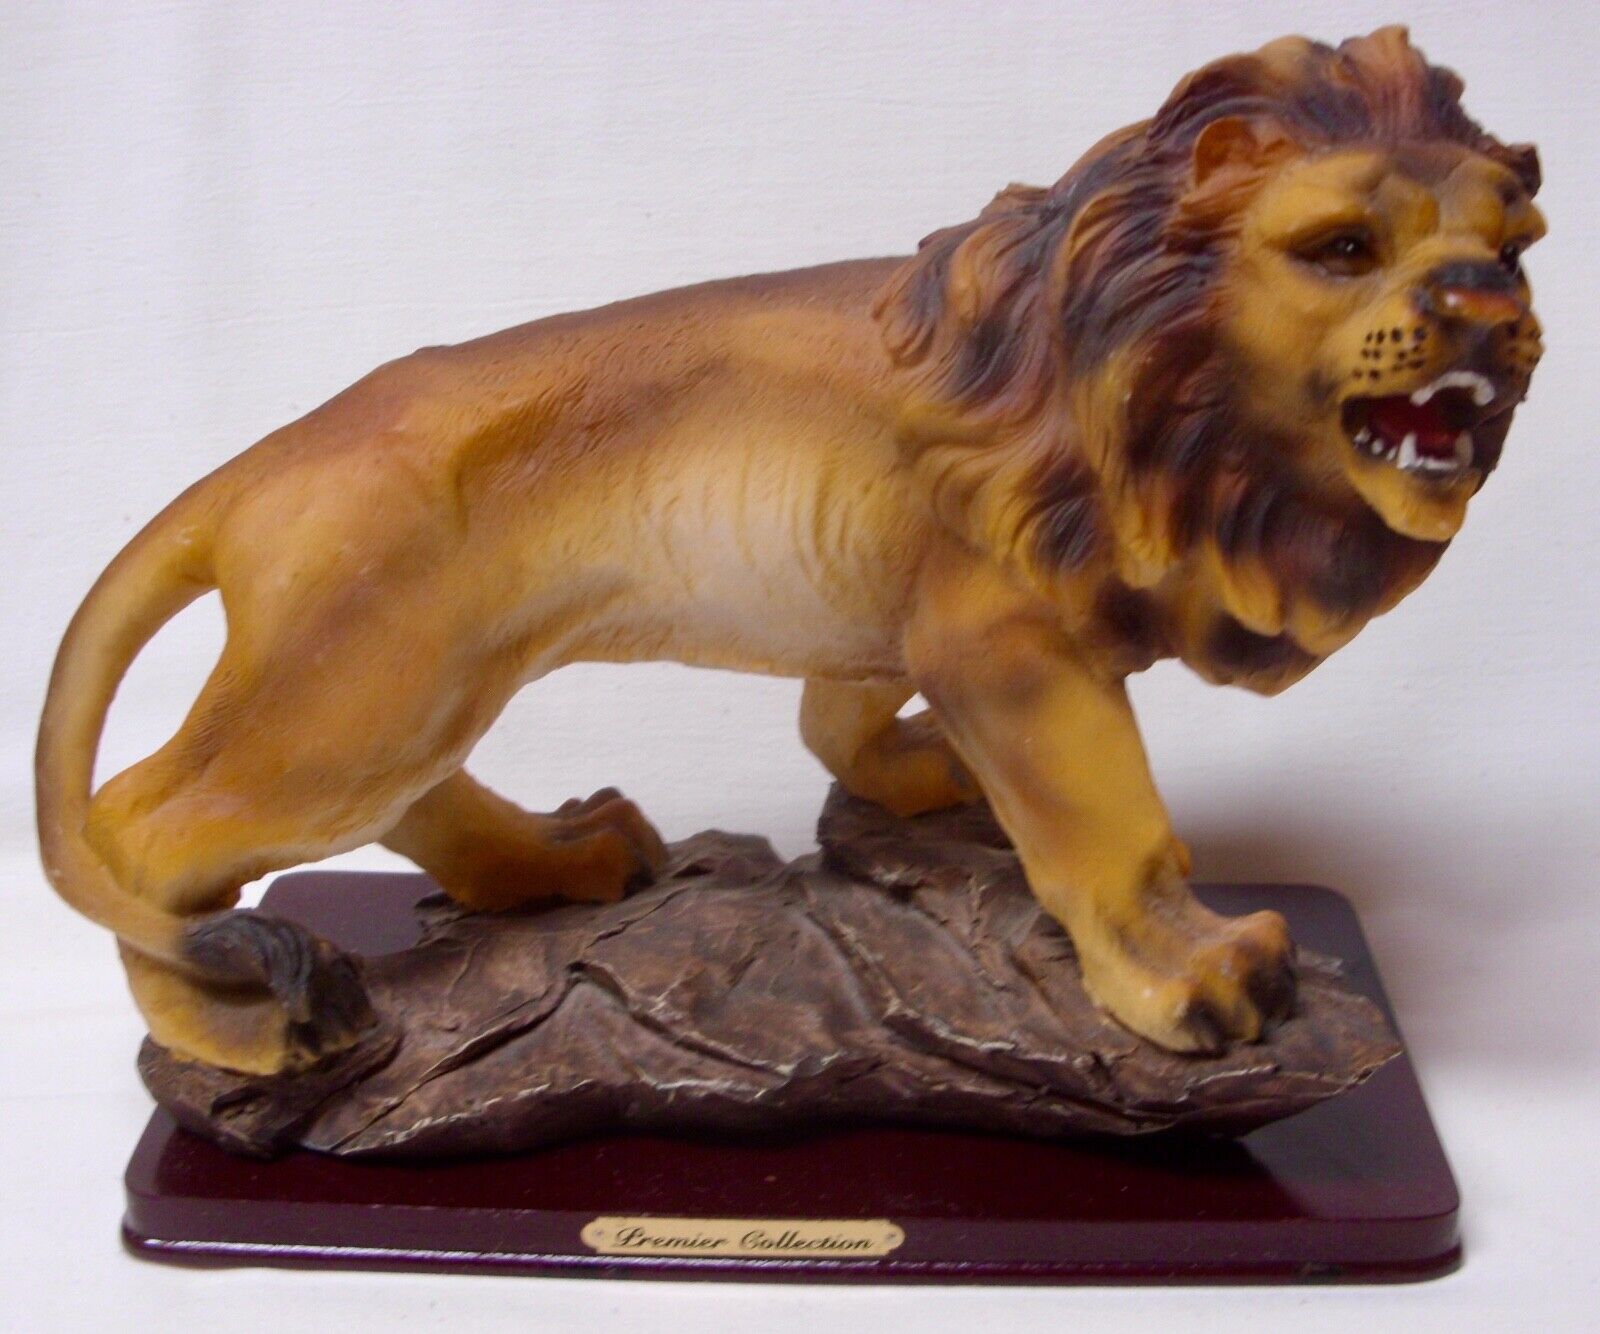 Majestic LION STATUE from the “Premier Collection”